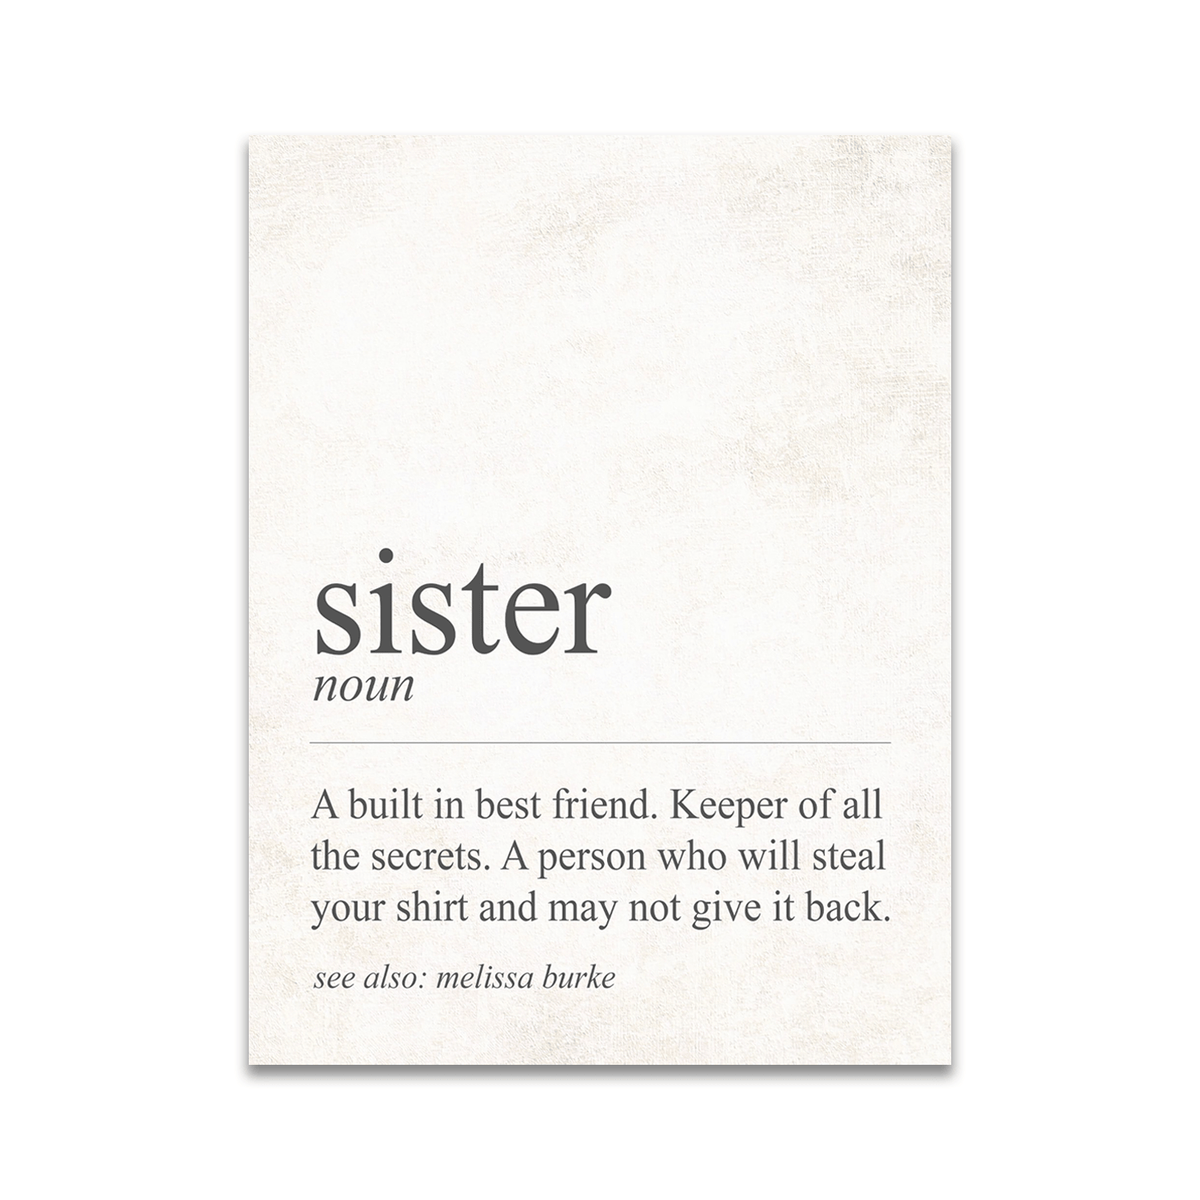 Sisters wall sign - &quot;A built in best friend. Keeper of all the secrets. A person who will steal your shirt and may not give it back.&quot;